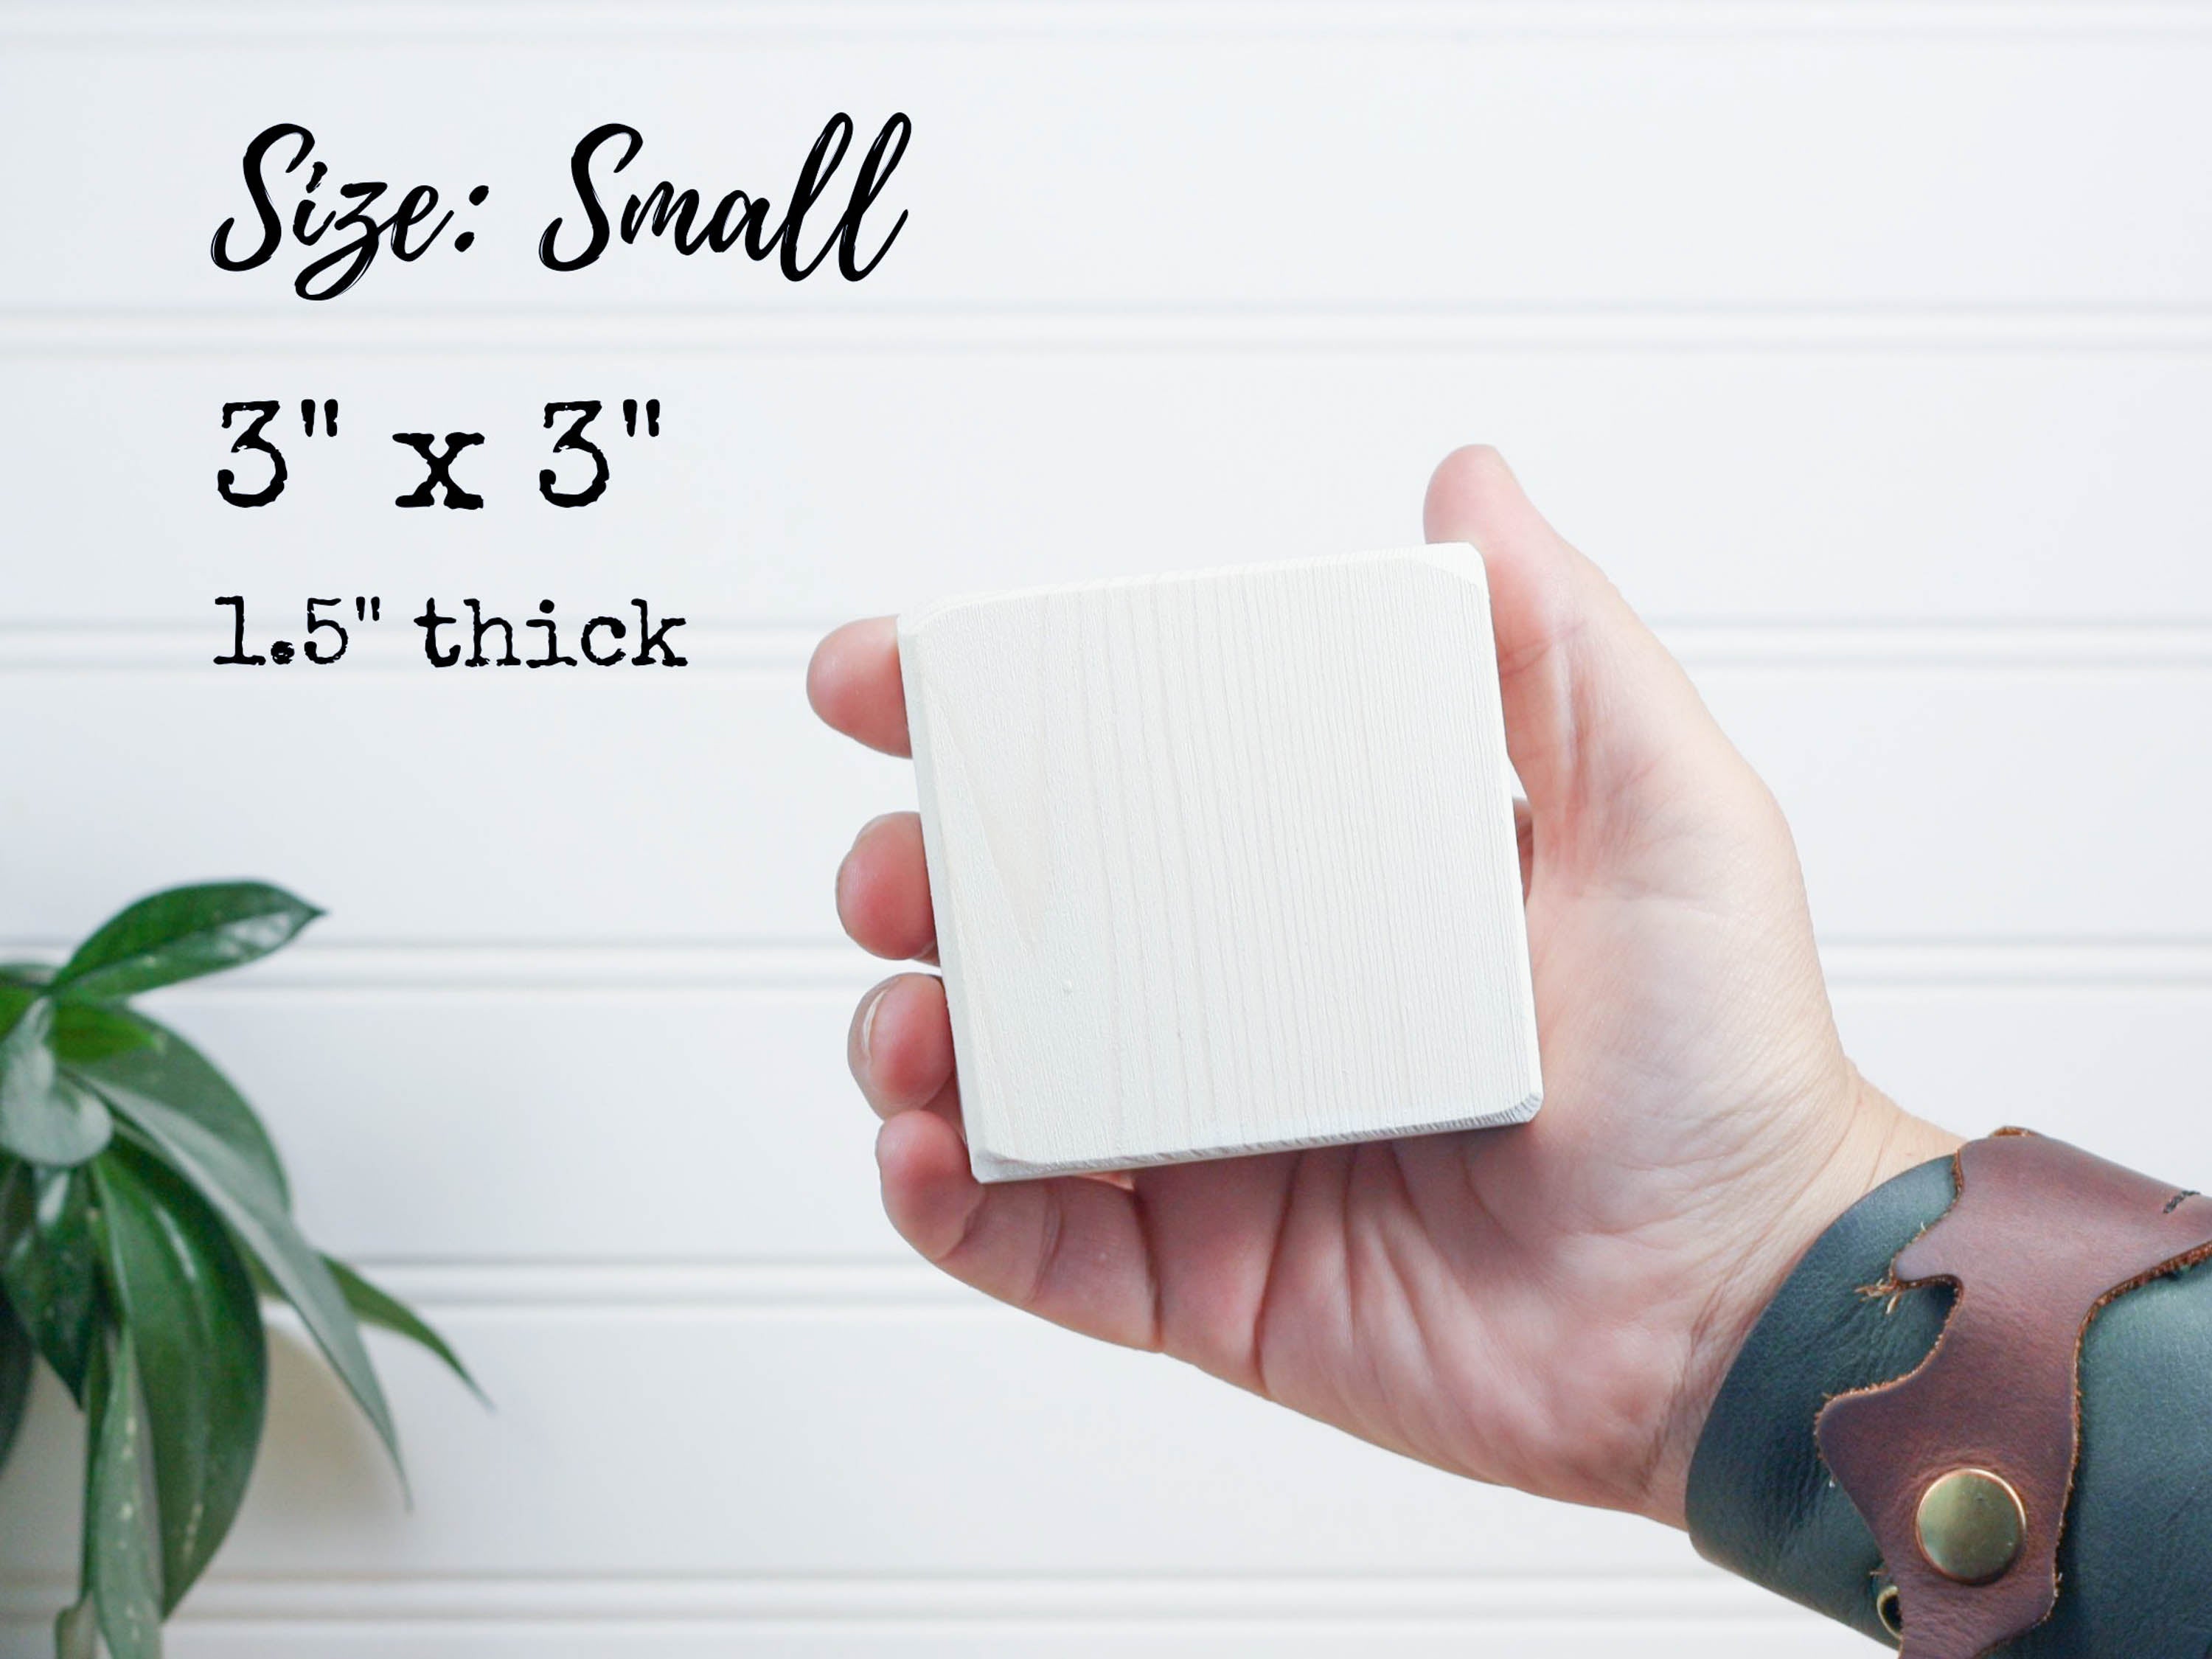 Sizing photo for 3 x 3 inch small sign showing the sign in a hand.